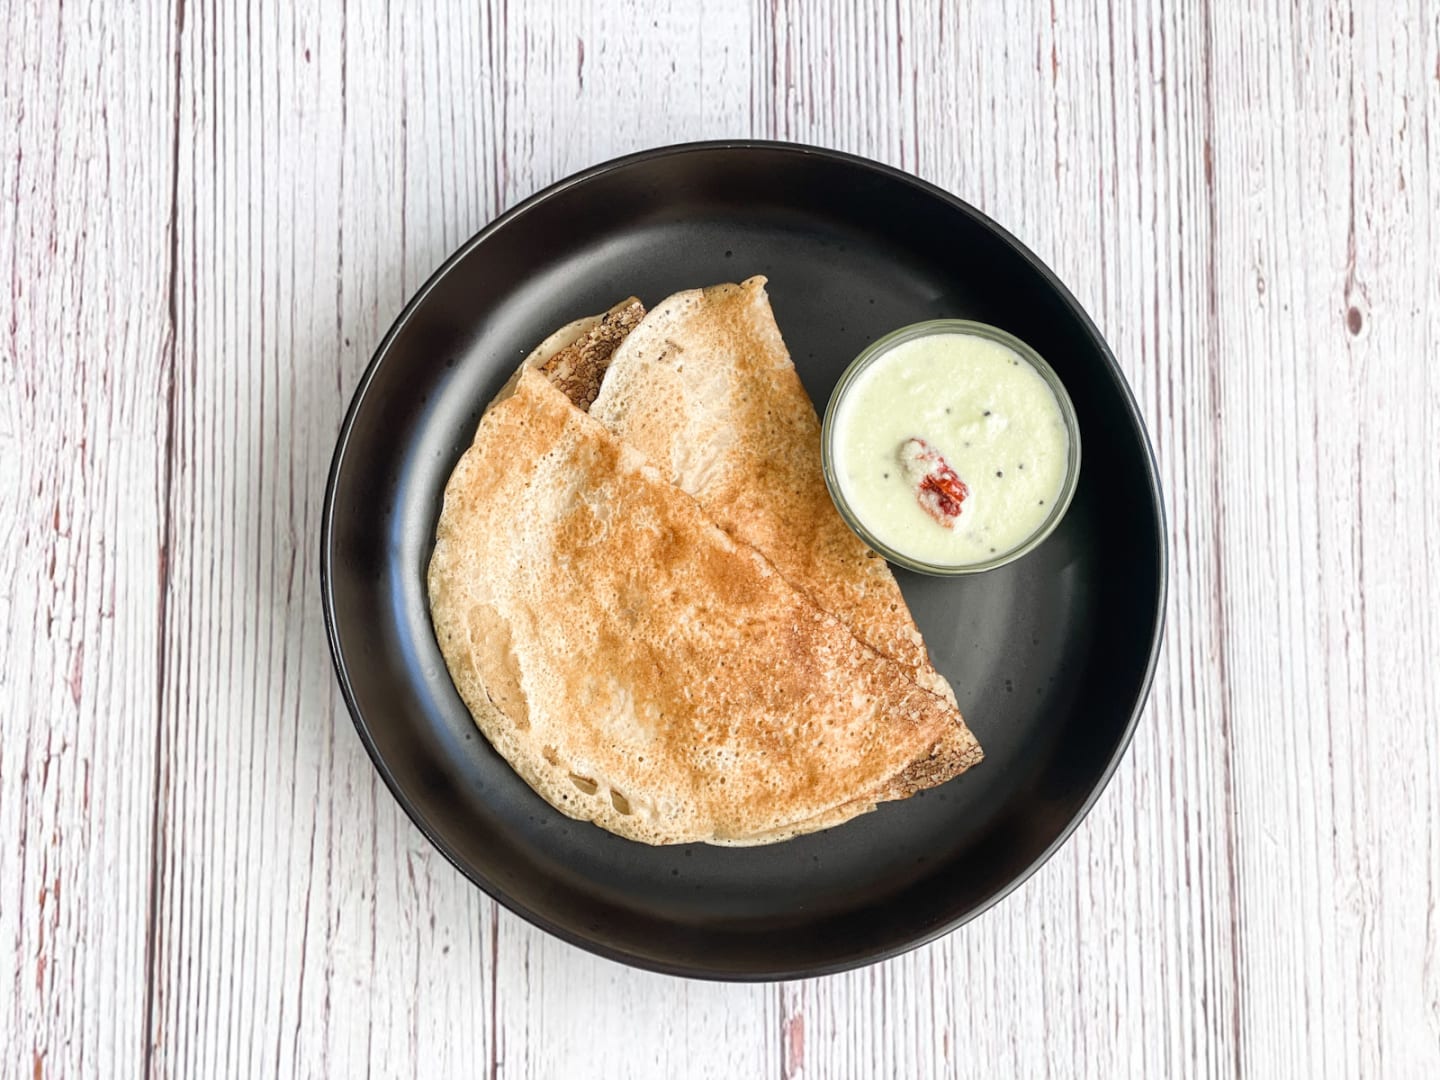 Dosa Tawa Recommendations For Crispy And Sumptuous Dosas At Home